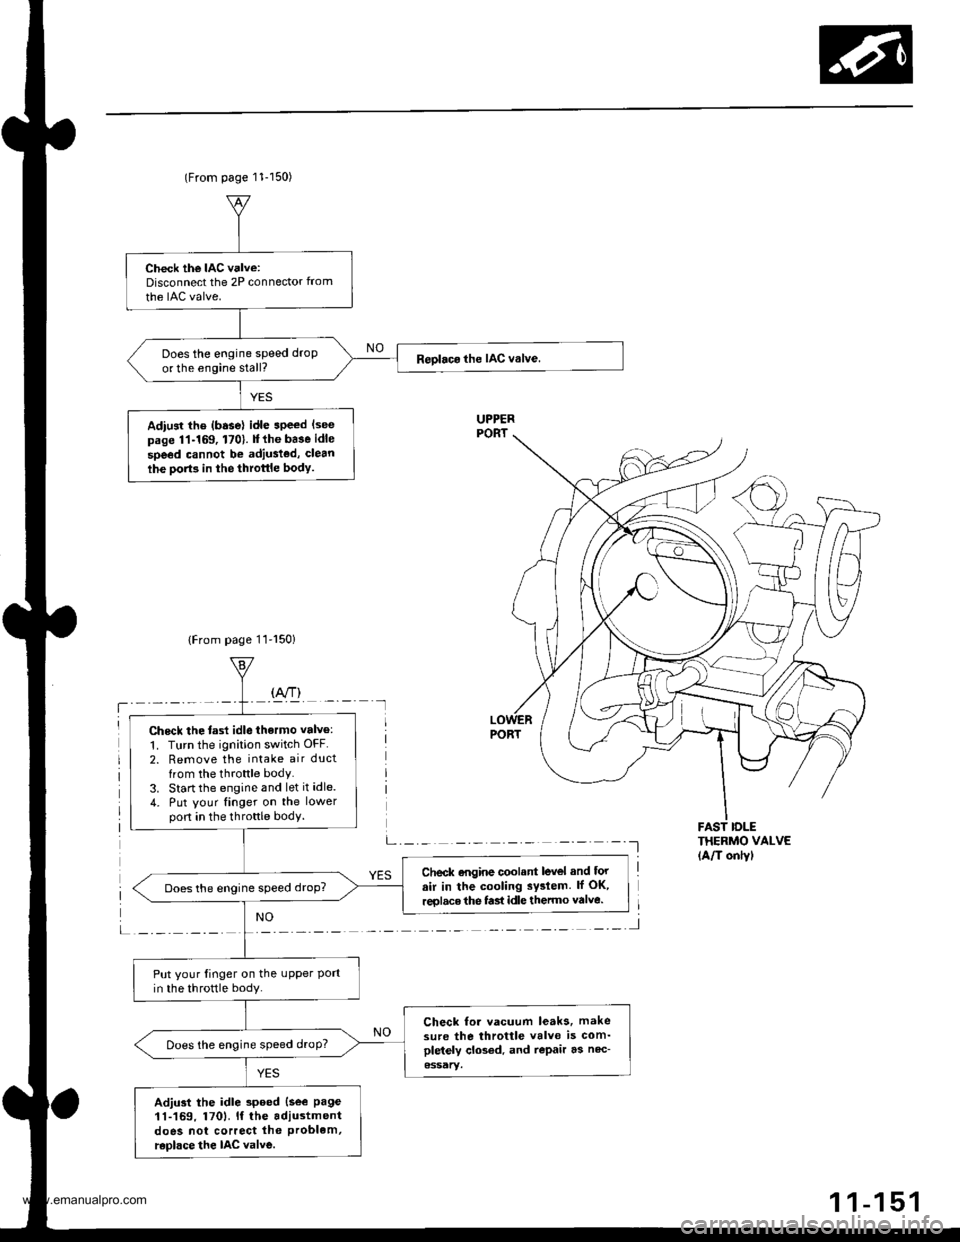 HONDA CR-V 1999 RD1-RD3 / 1.G Owners Manual 
(From page 11-150)
{From page 11-150}
THERMO VALVE(A/T onlyl
Check the IAC valve:Disconnect the 2P connector from
the IAC valve.
Does the engine speed droP
or the engine stall?
Adiust the (basel idl�